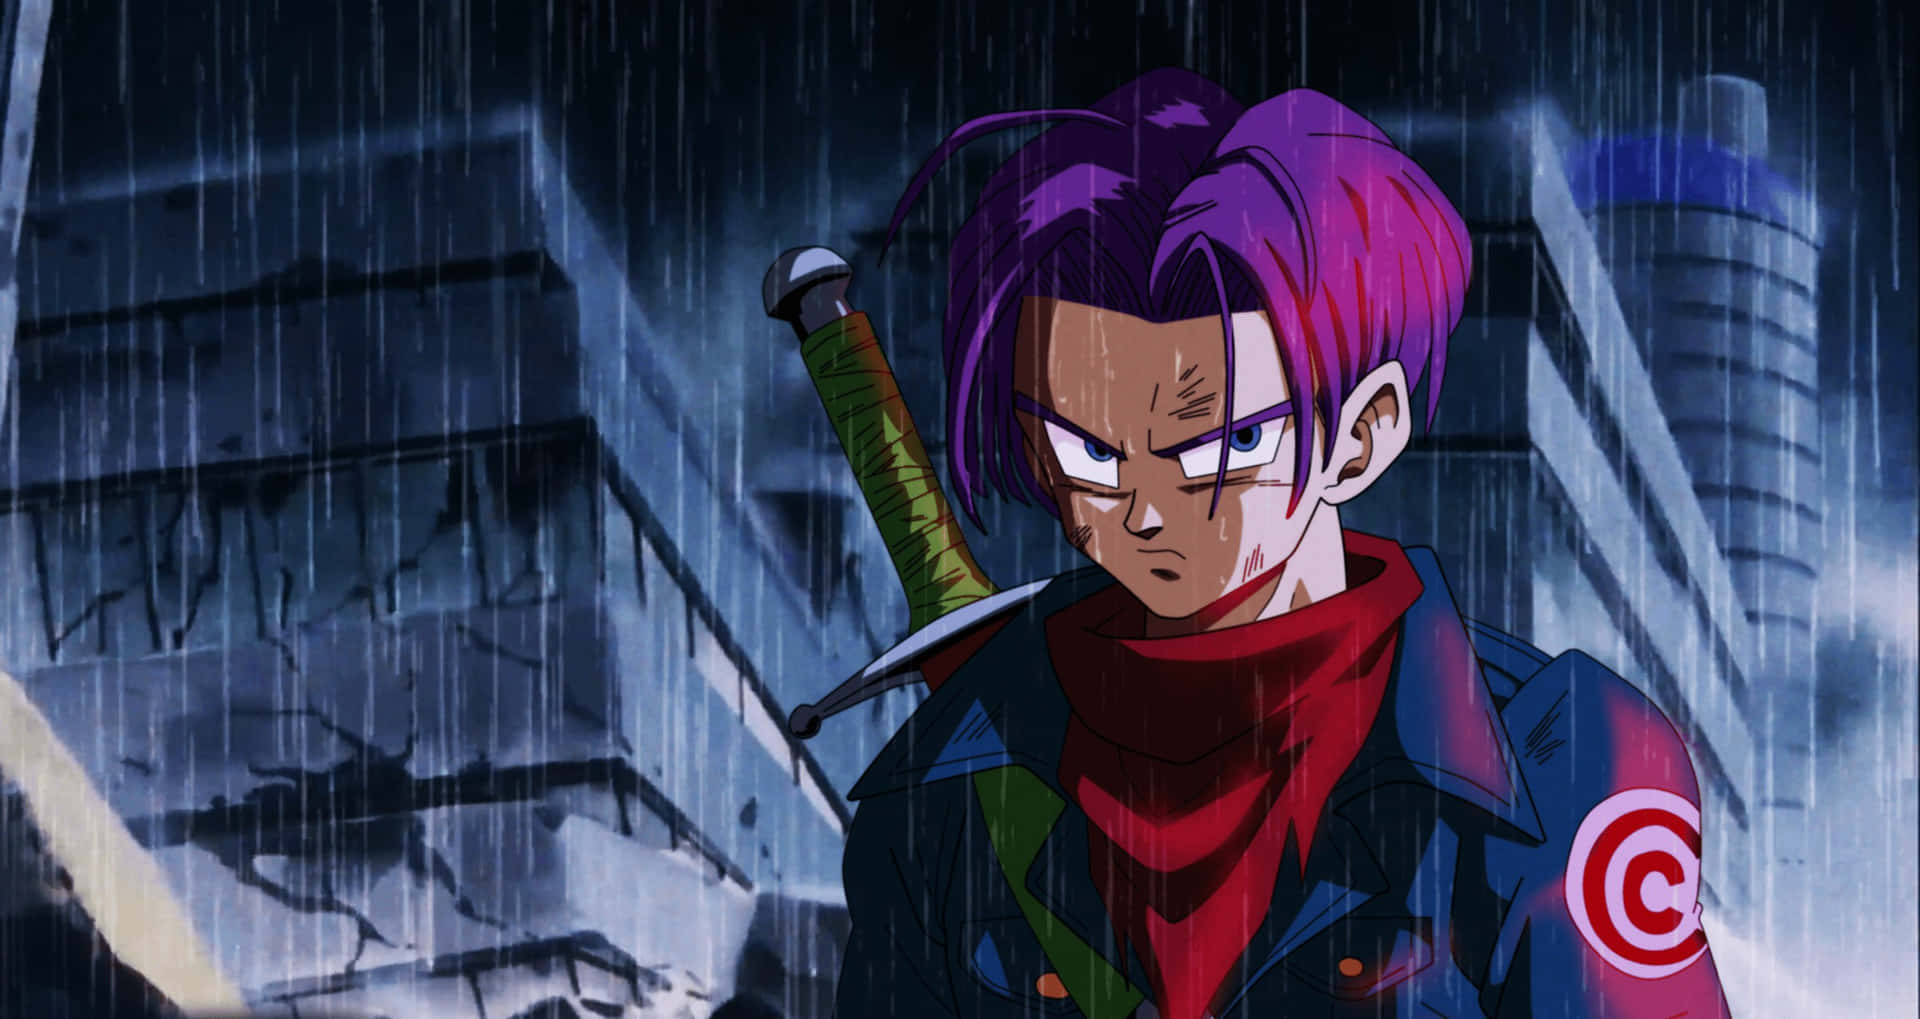 Trunks Soaked In The Rain